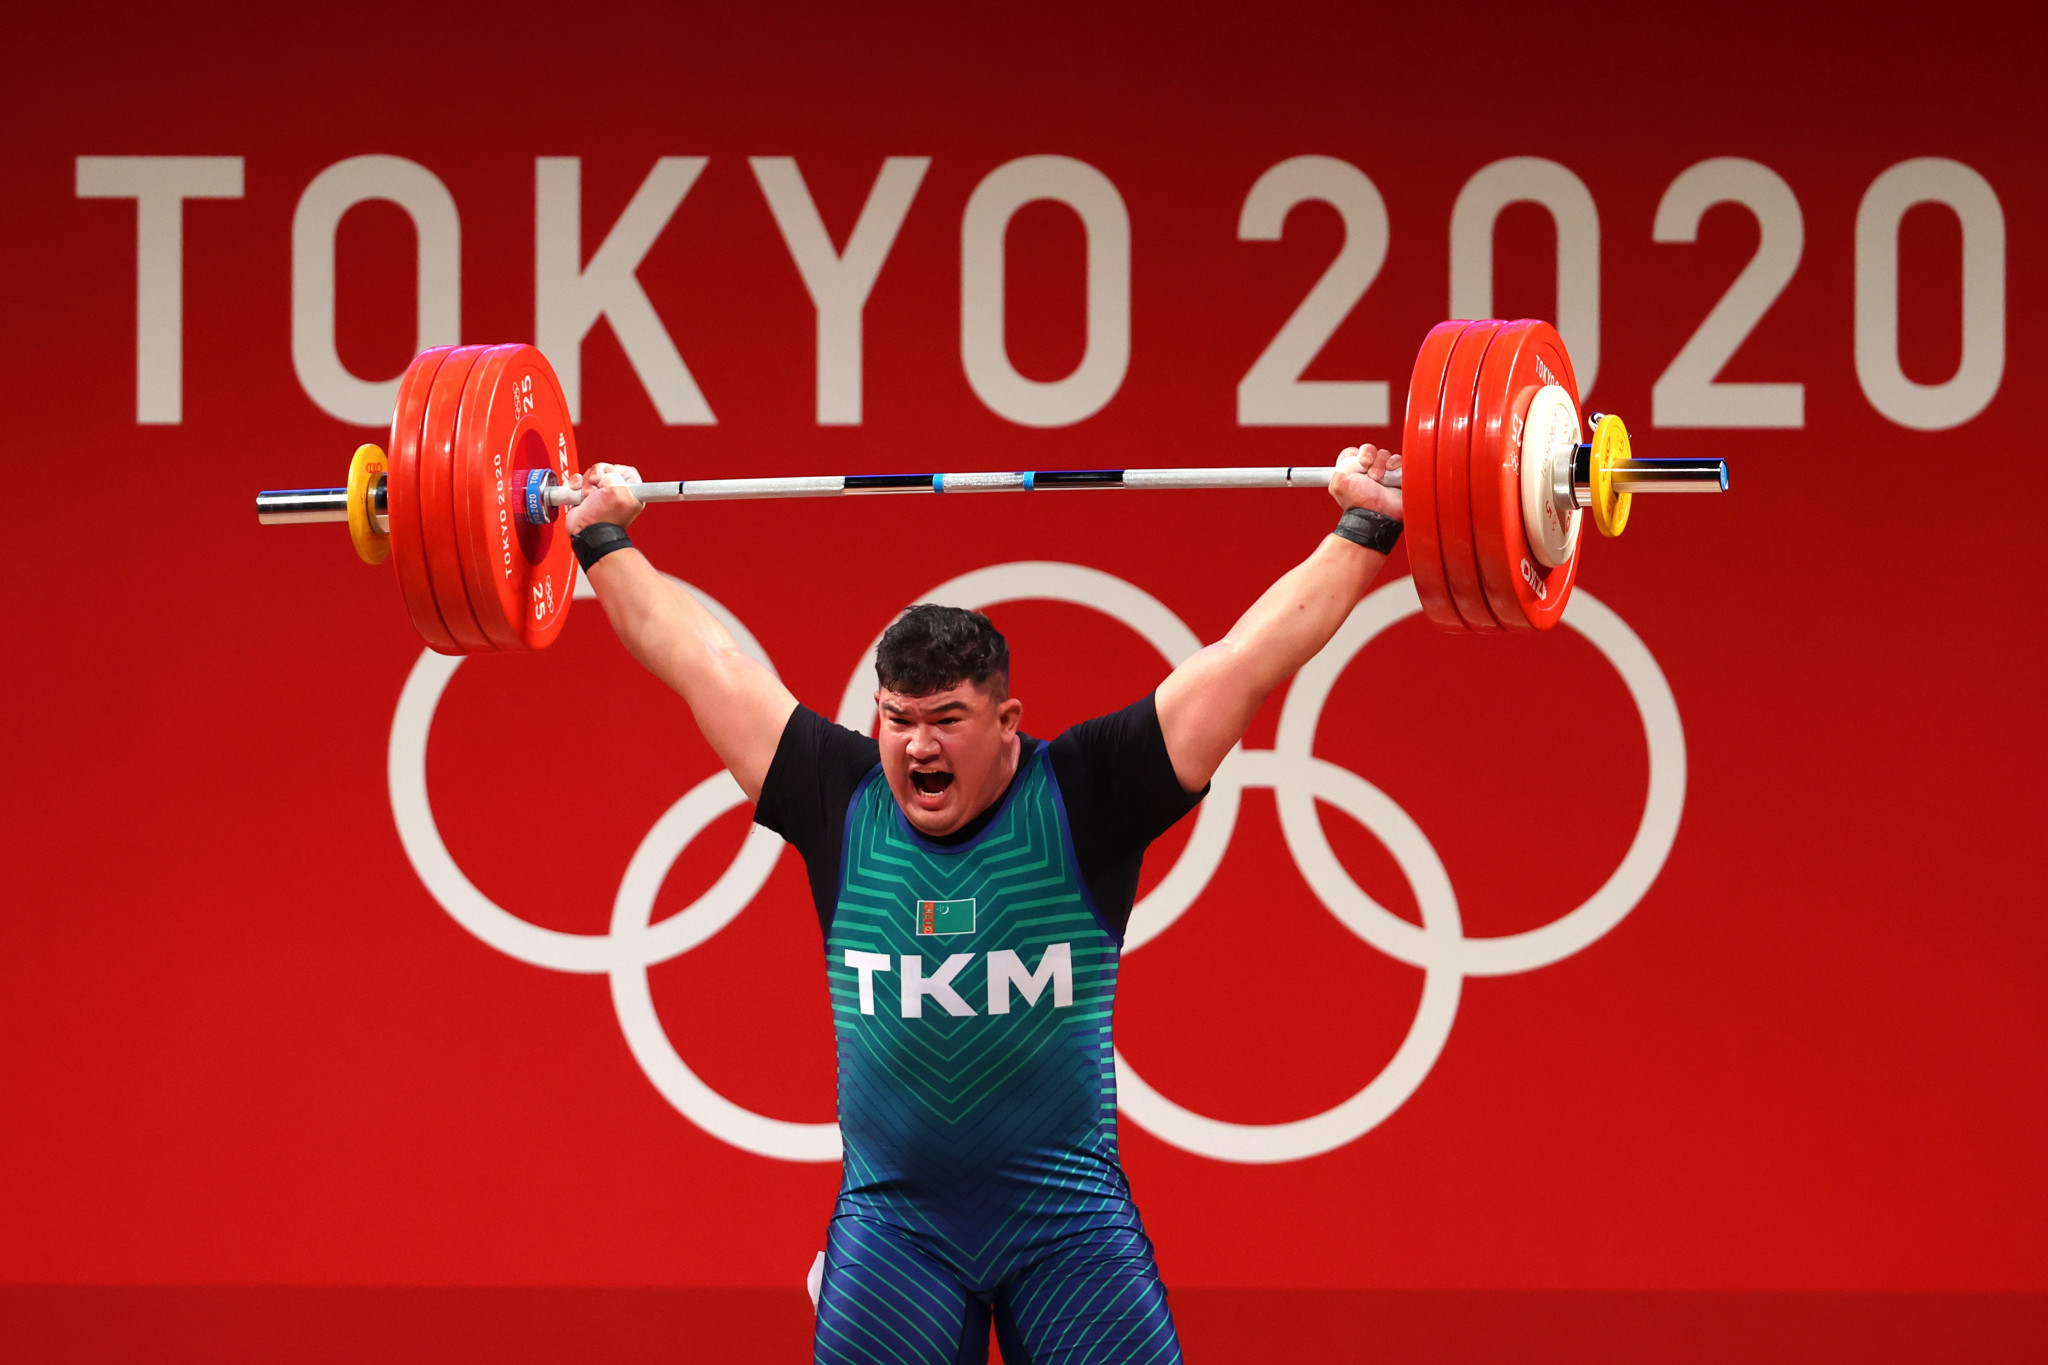 The IOC has expressed concerns over governance at the IWF, and Thomas Bach has warned that weightlifting's place at the Olympics could be at risk without reforms ©Getty Images